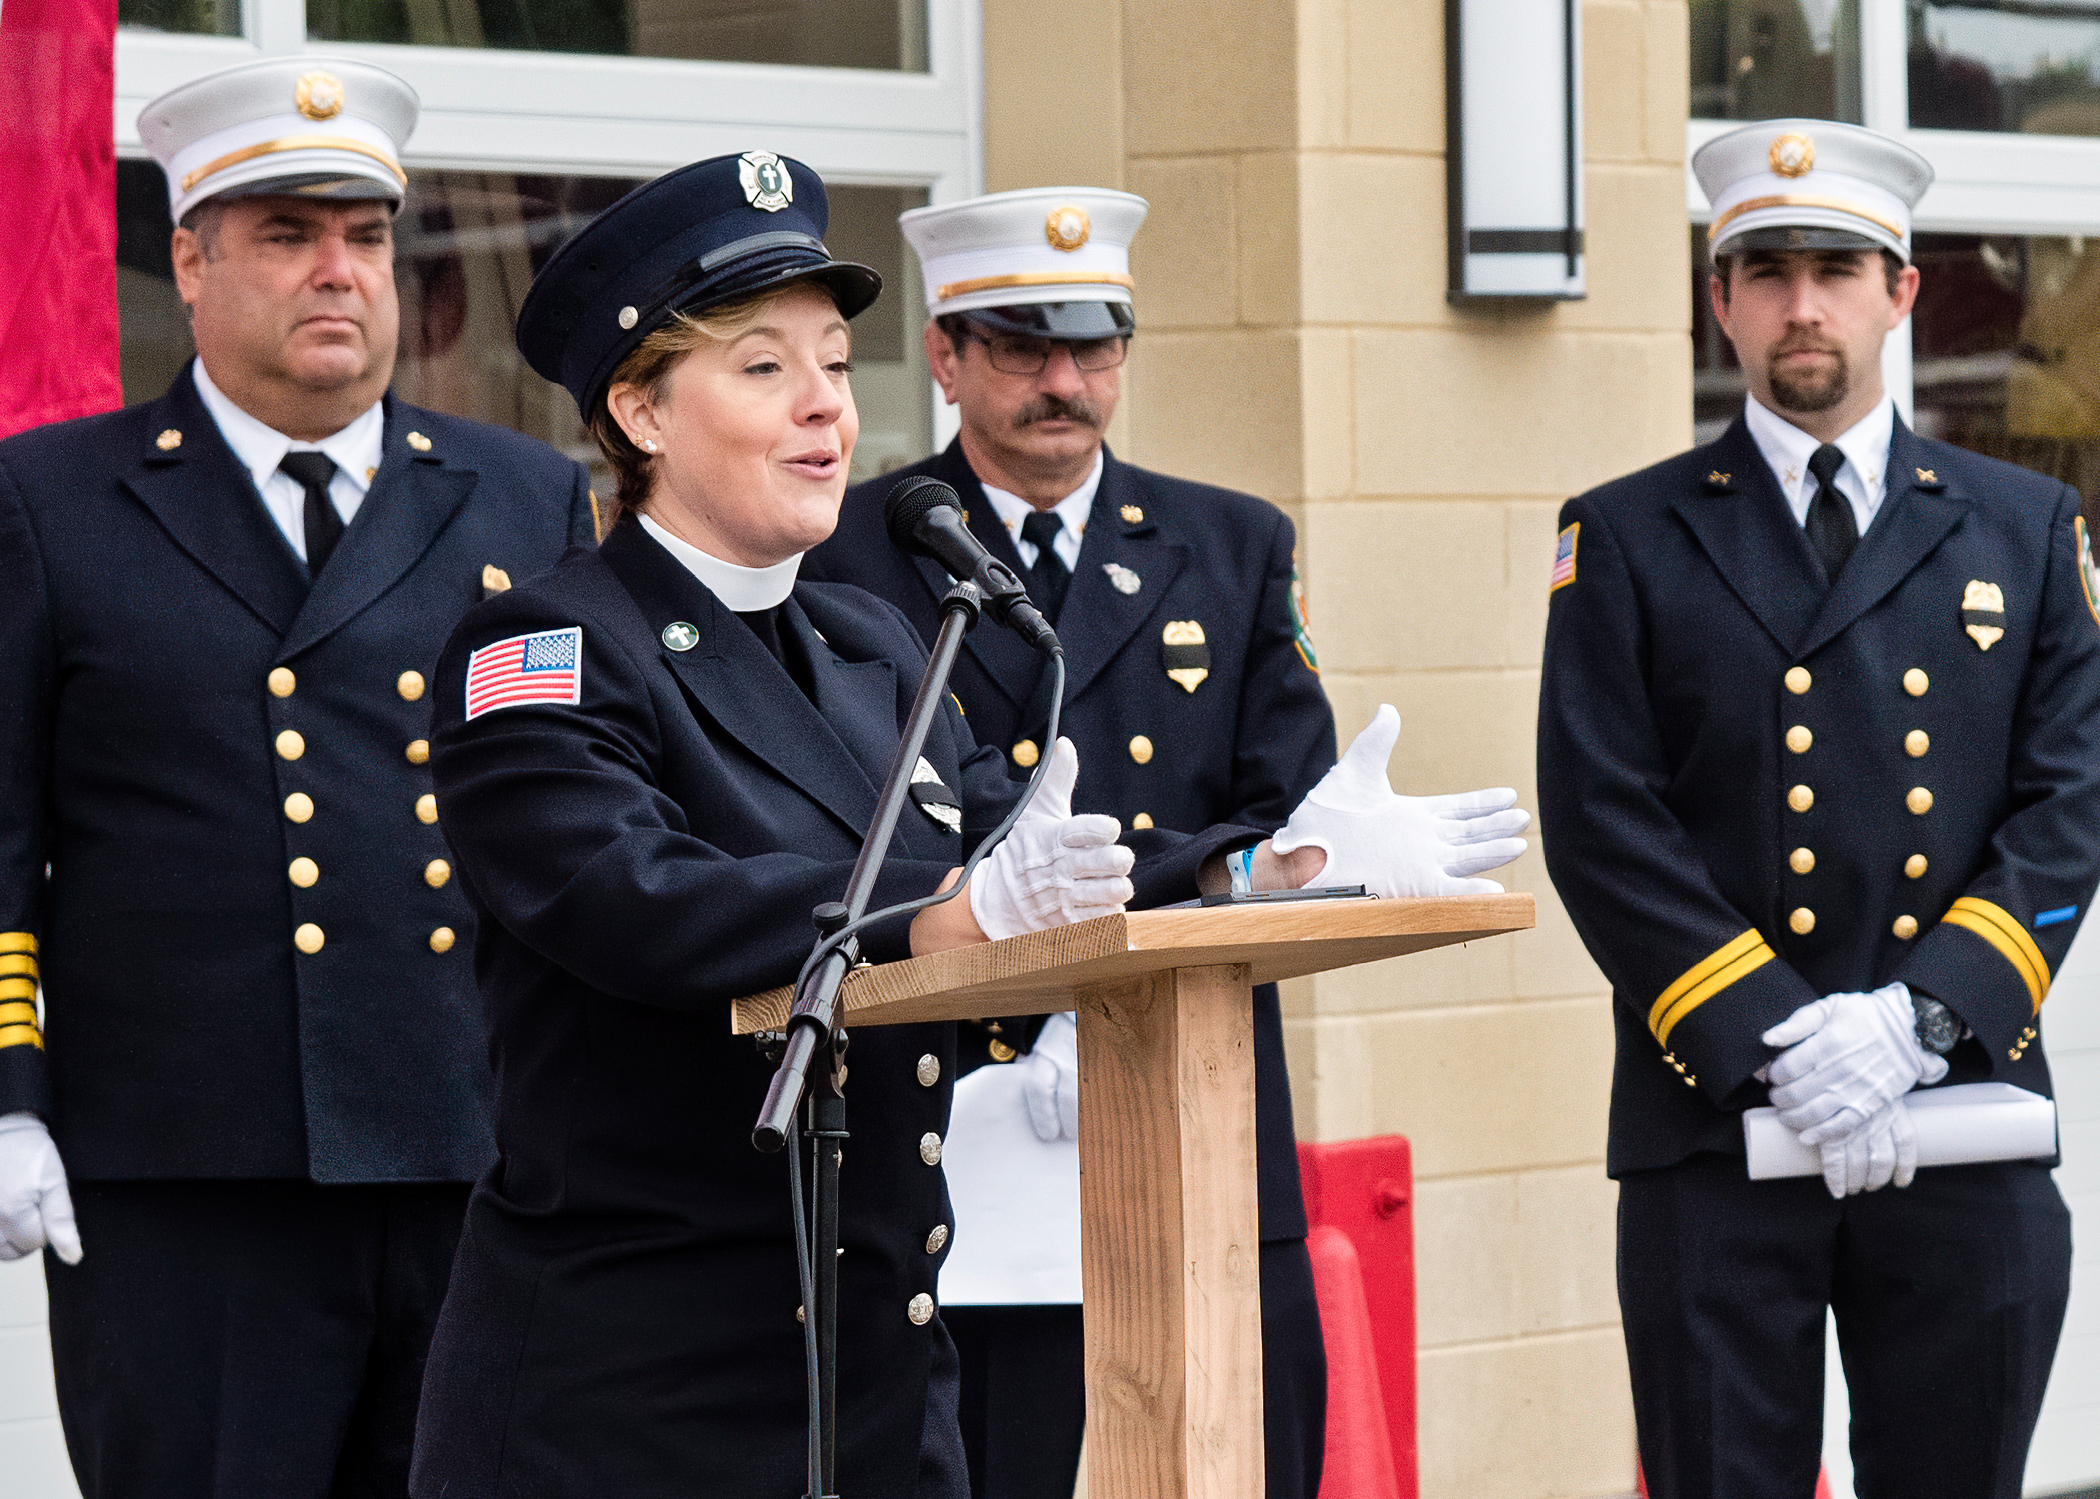 Reverend Vanessa Winters, chaplain of the Westhampton Beach Fire Department. COURTESY WESTHAMPTON BEACH FIRE DEPARTMENT